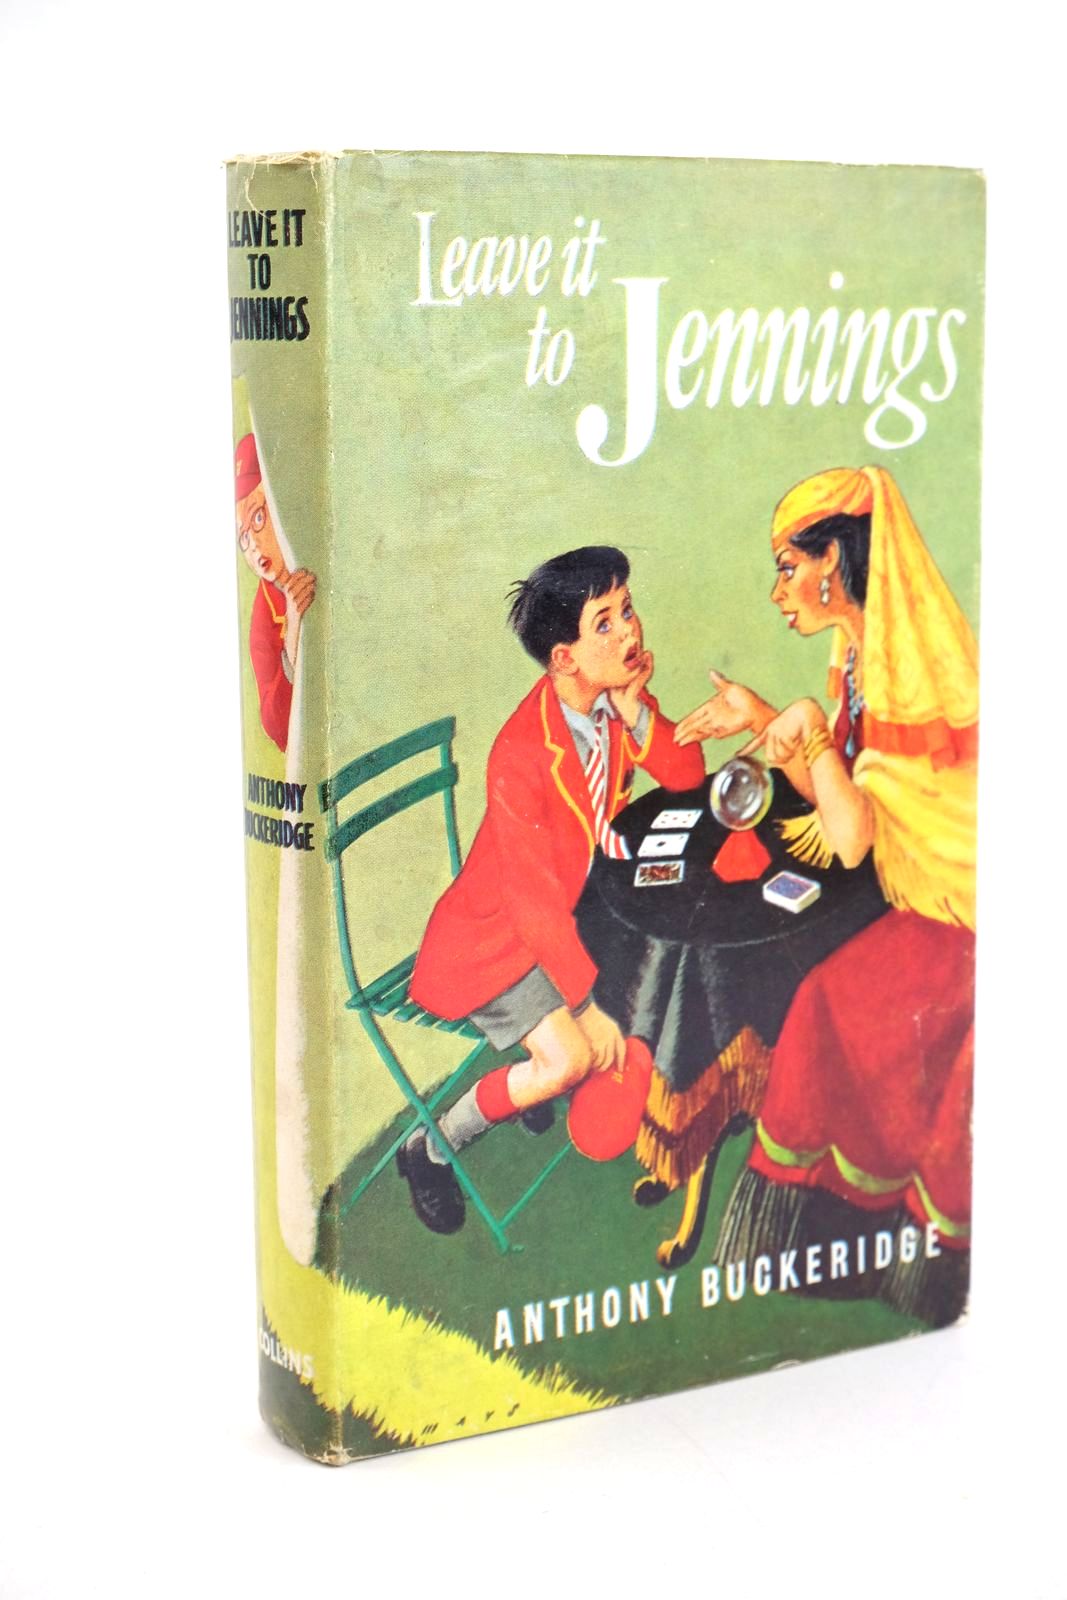 Photo of LEAVE IT TO JENNINGS written by Buckeridge, Anthony illustrated by Mays, published by Collins (STOCK CODE: 1327519)  for sale by Stella & Rose's Books